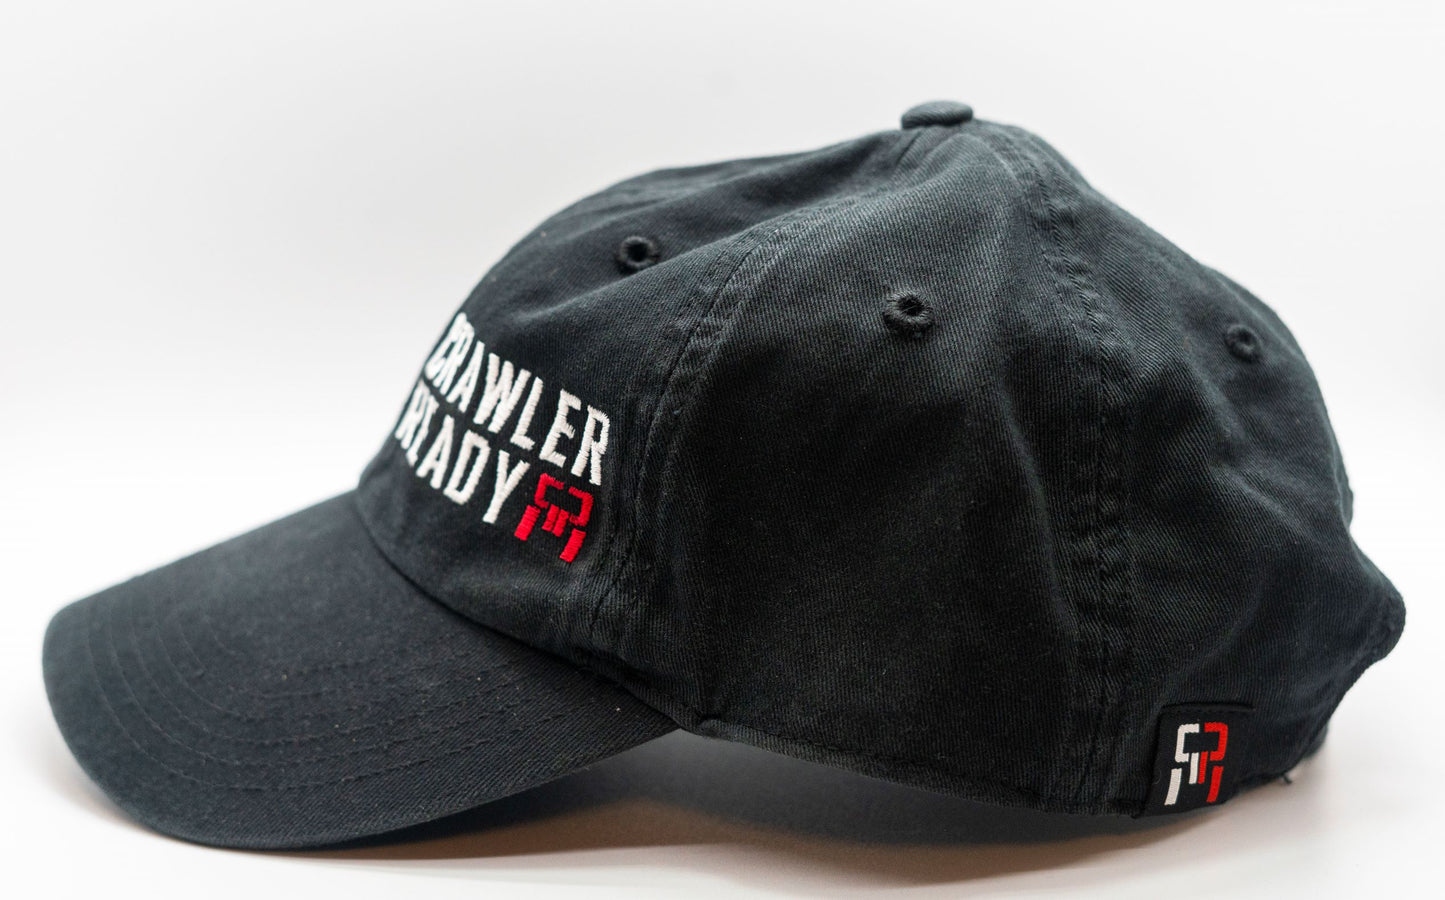 Crawler Ready Stacked Logo Small Dad hat